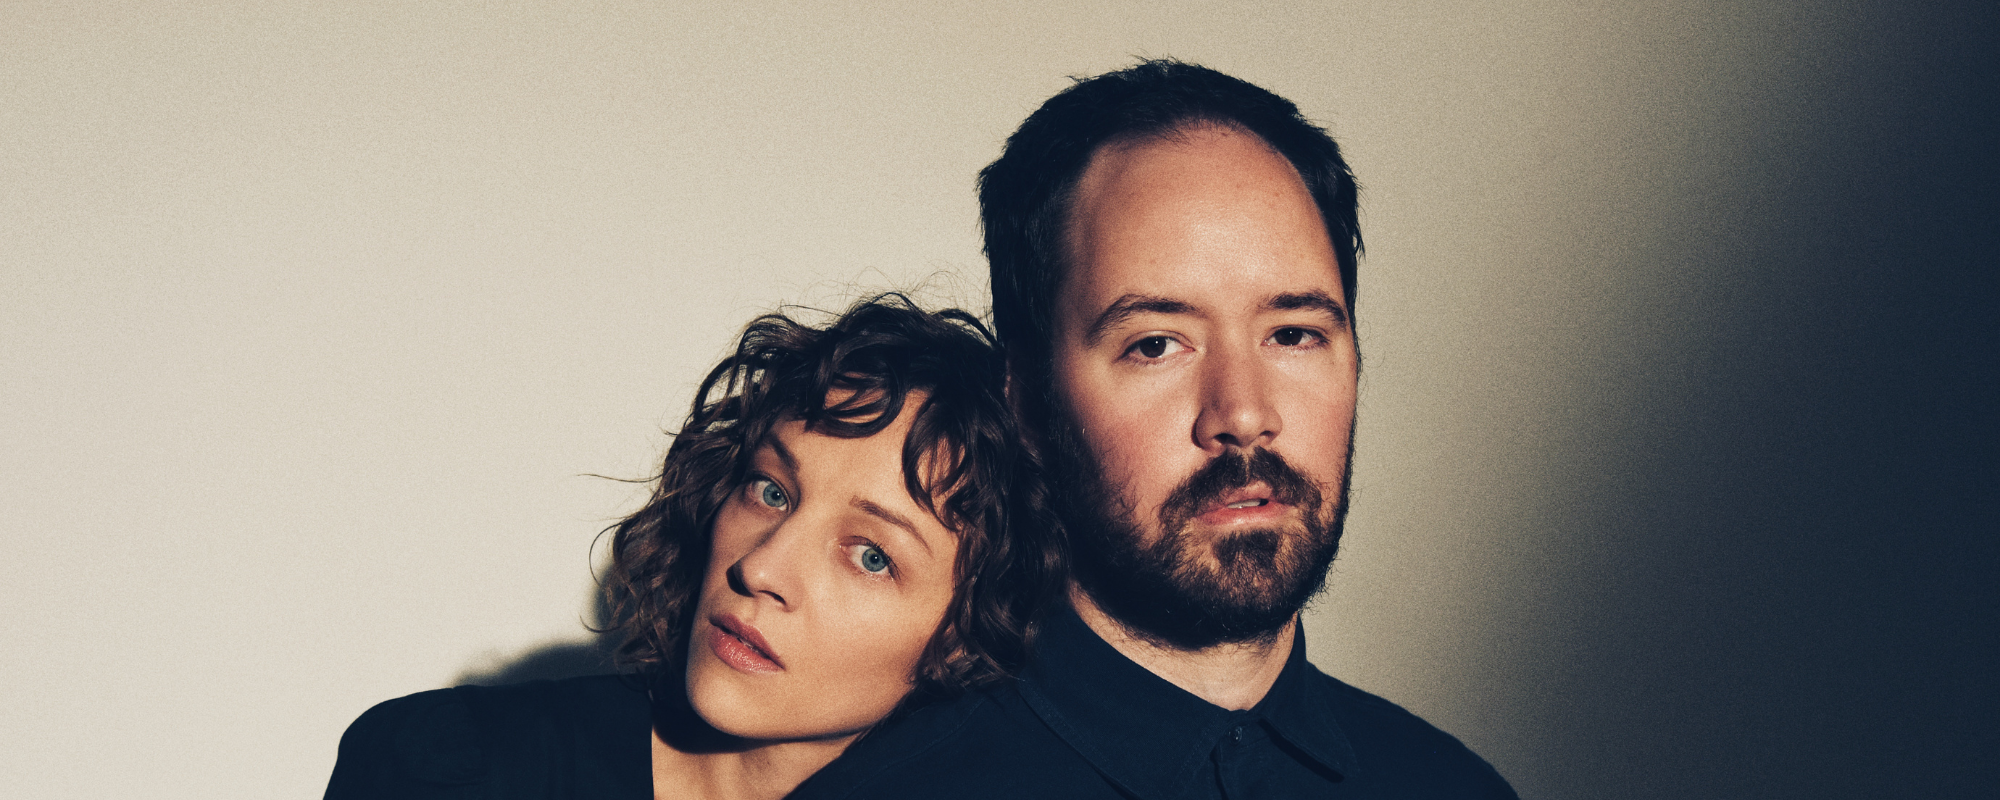 Molting From Mandolin Orange: Emily Frantz & Andrew Marlin Expand On Their Eponymous Debut LP as ‘Watchhouse’